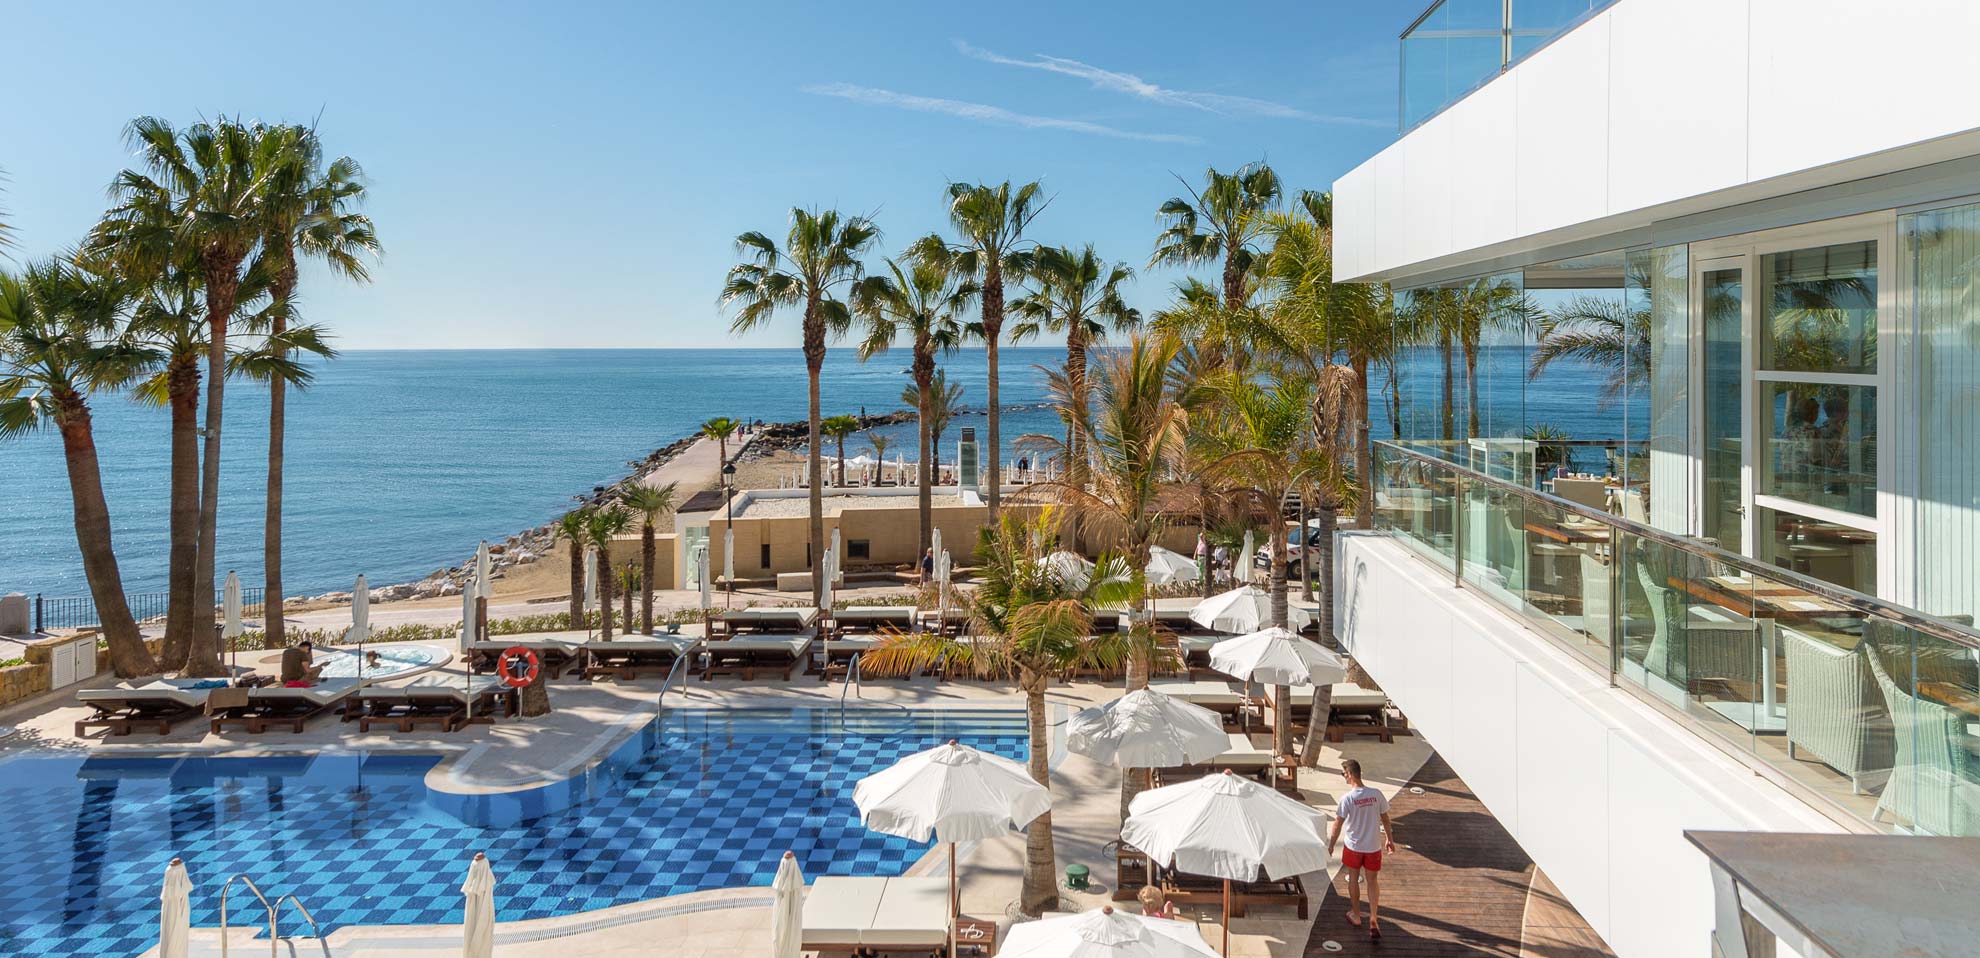 Most Luxurious Hotels in Marbella, Spain - Travel Dreams Magazine